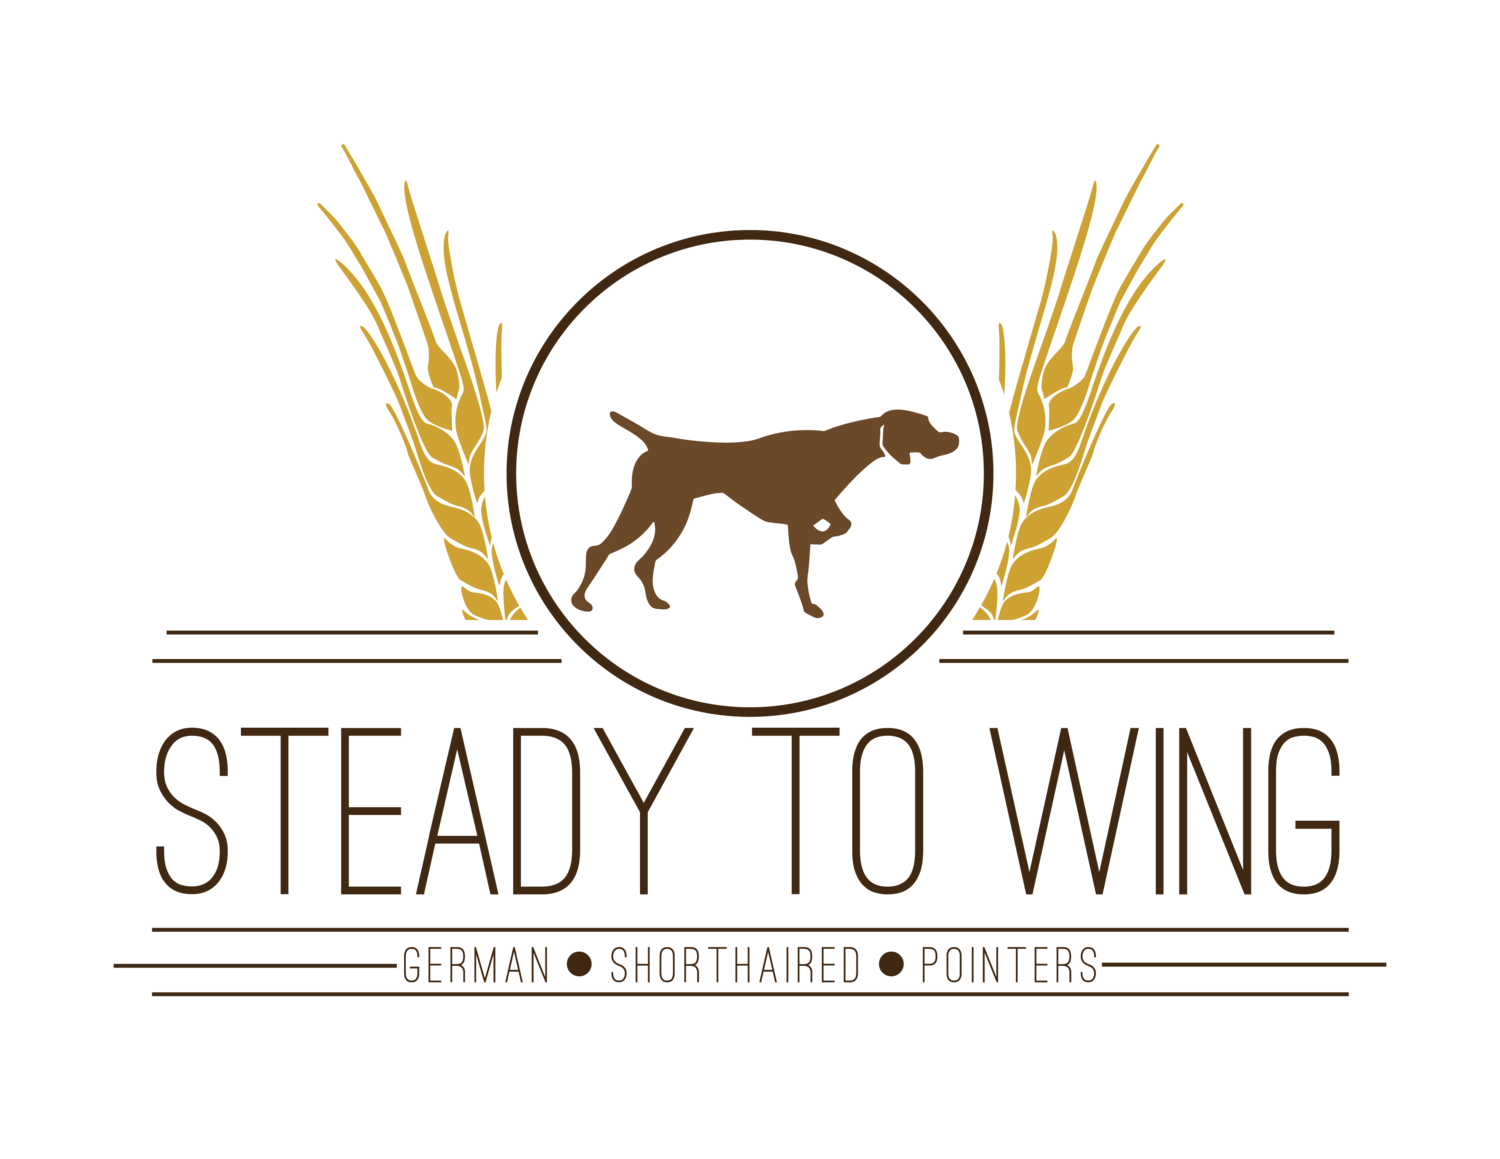 German Shorthaired Pointers | Steady to Wing Shorthairs